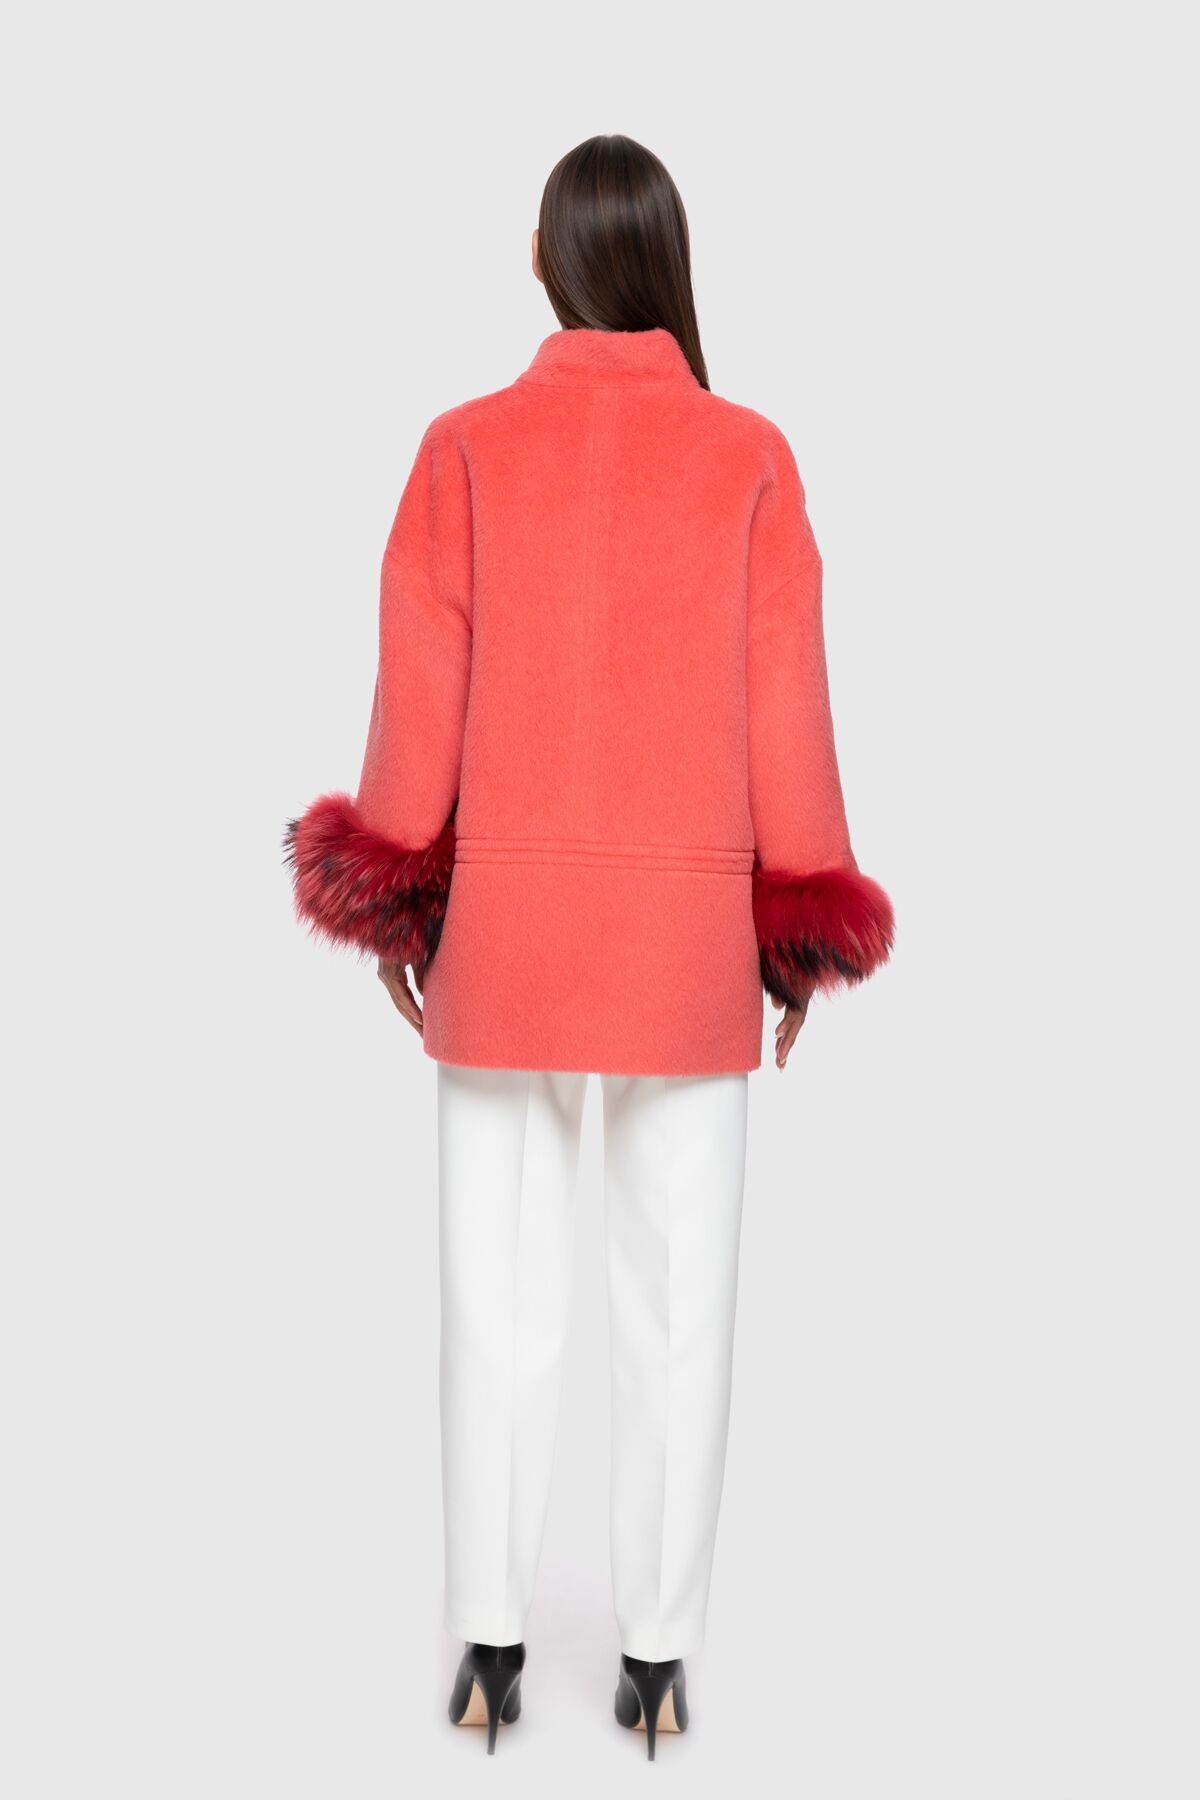 Fur Detail Wide Cut Red Cachet Coat with Sleeves